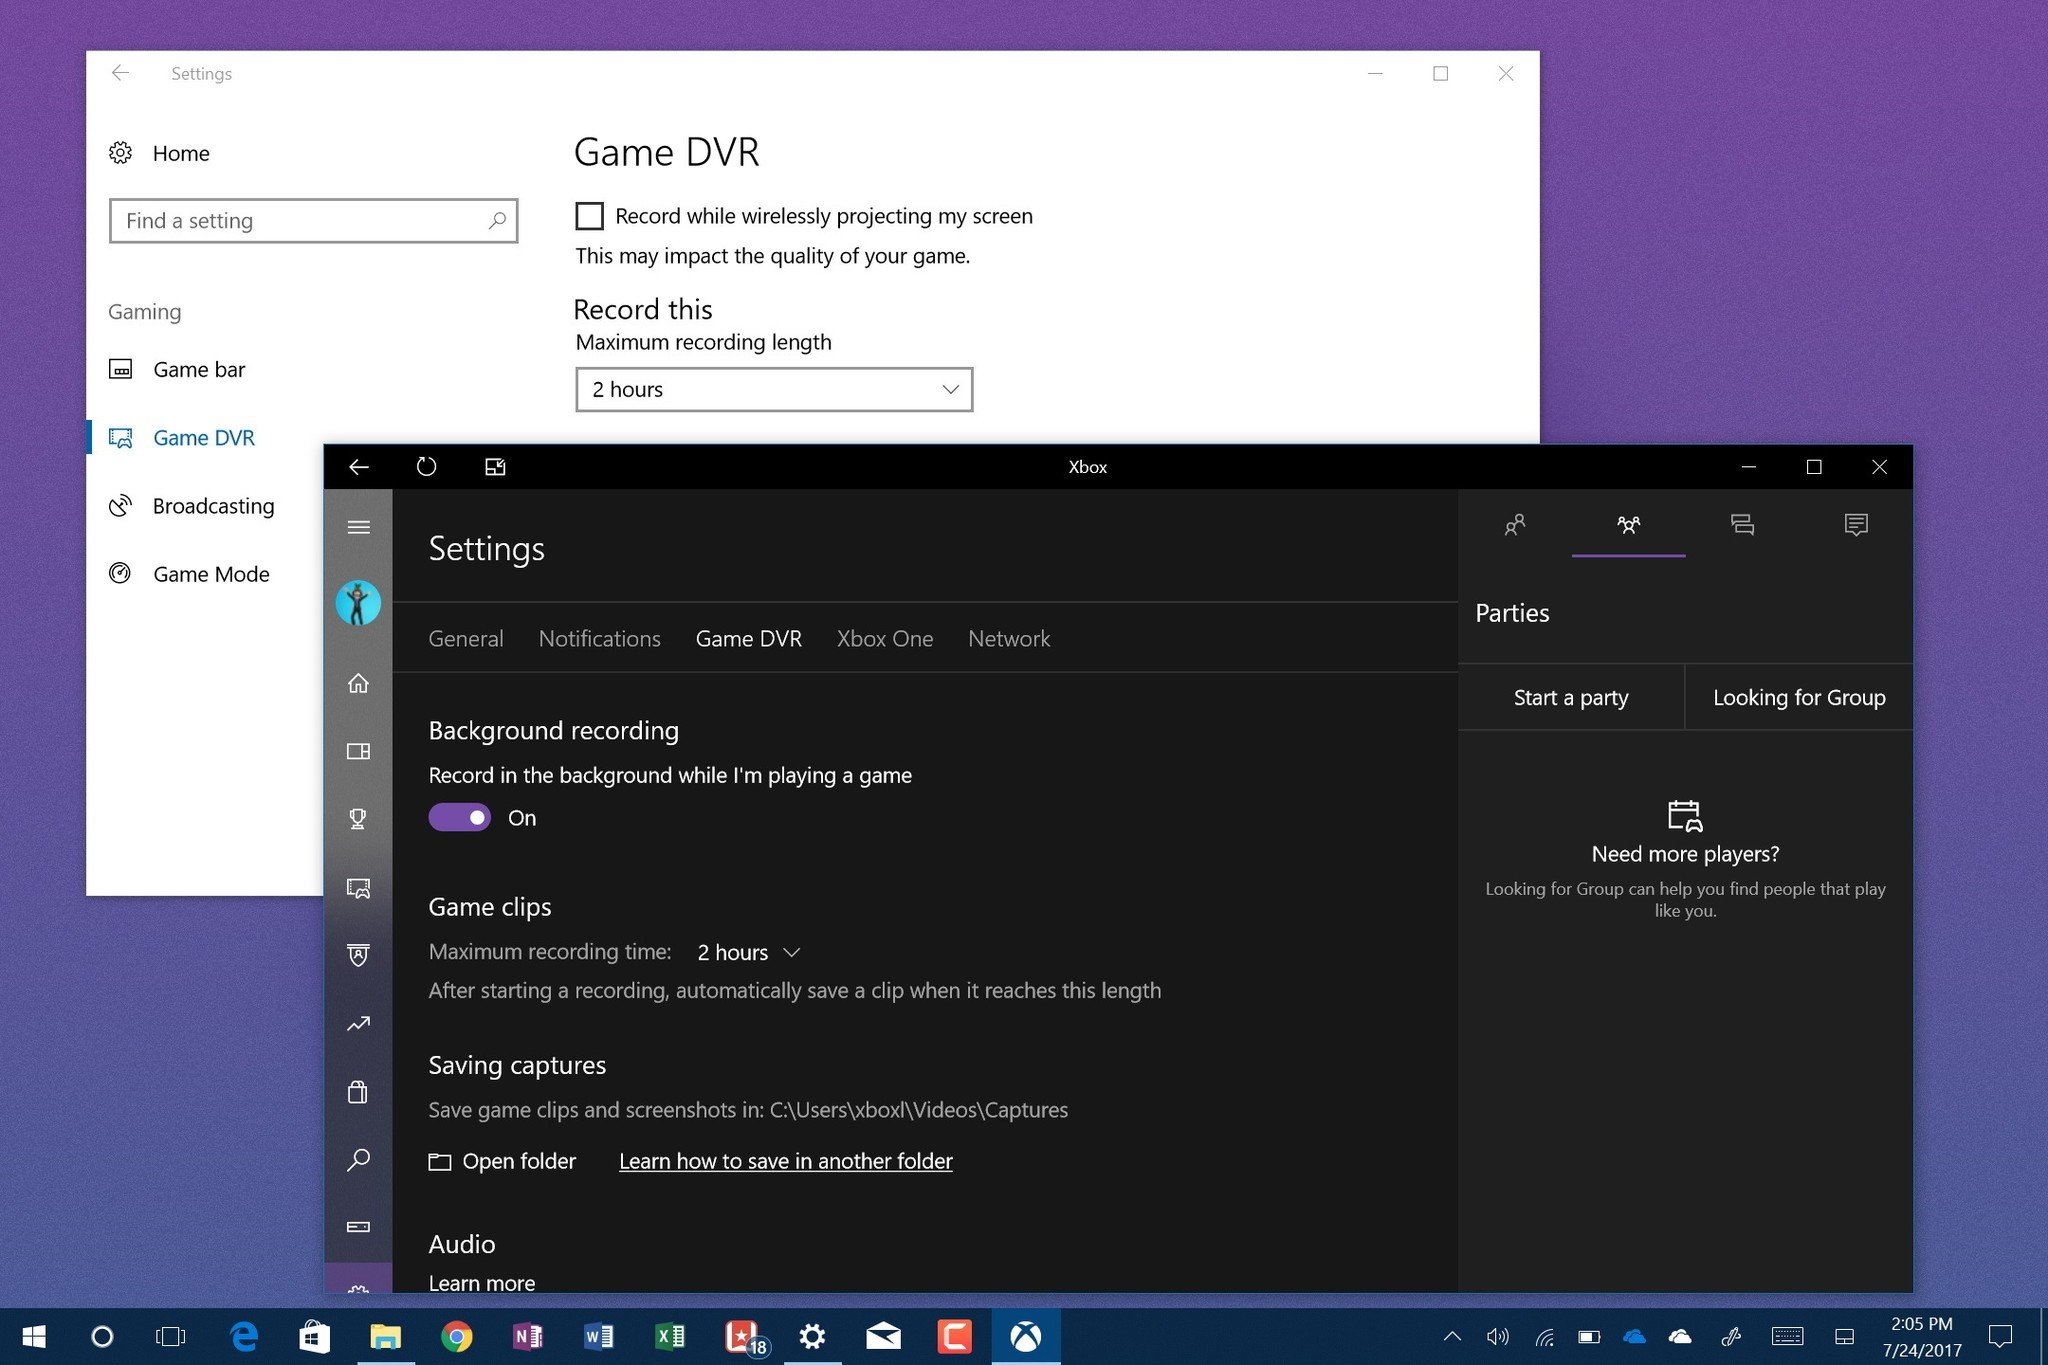 How To Change Windows 10 Game Dvr Background Recording Time